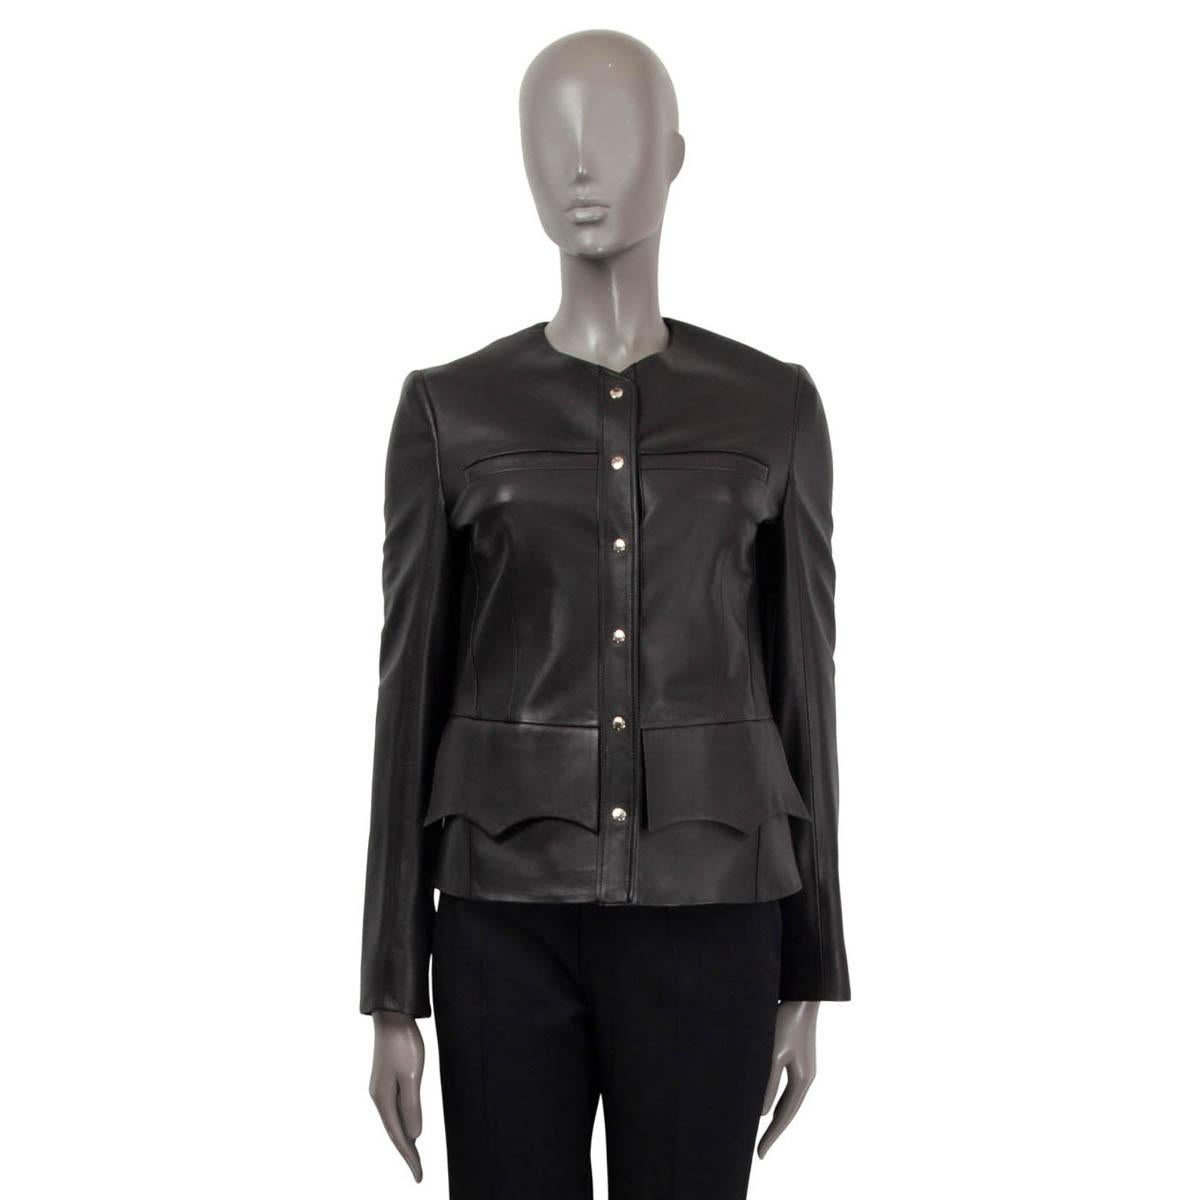 100% authentic Louis Vuitton long sleeve blazer in black soft lamb leather (100%). Features two slit pockets on the chest and two scalloped flap pockets. Opens with silver-tone 'Louis Vuitton' push buttons on the front. Lined in black viscose (50%)